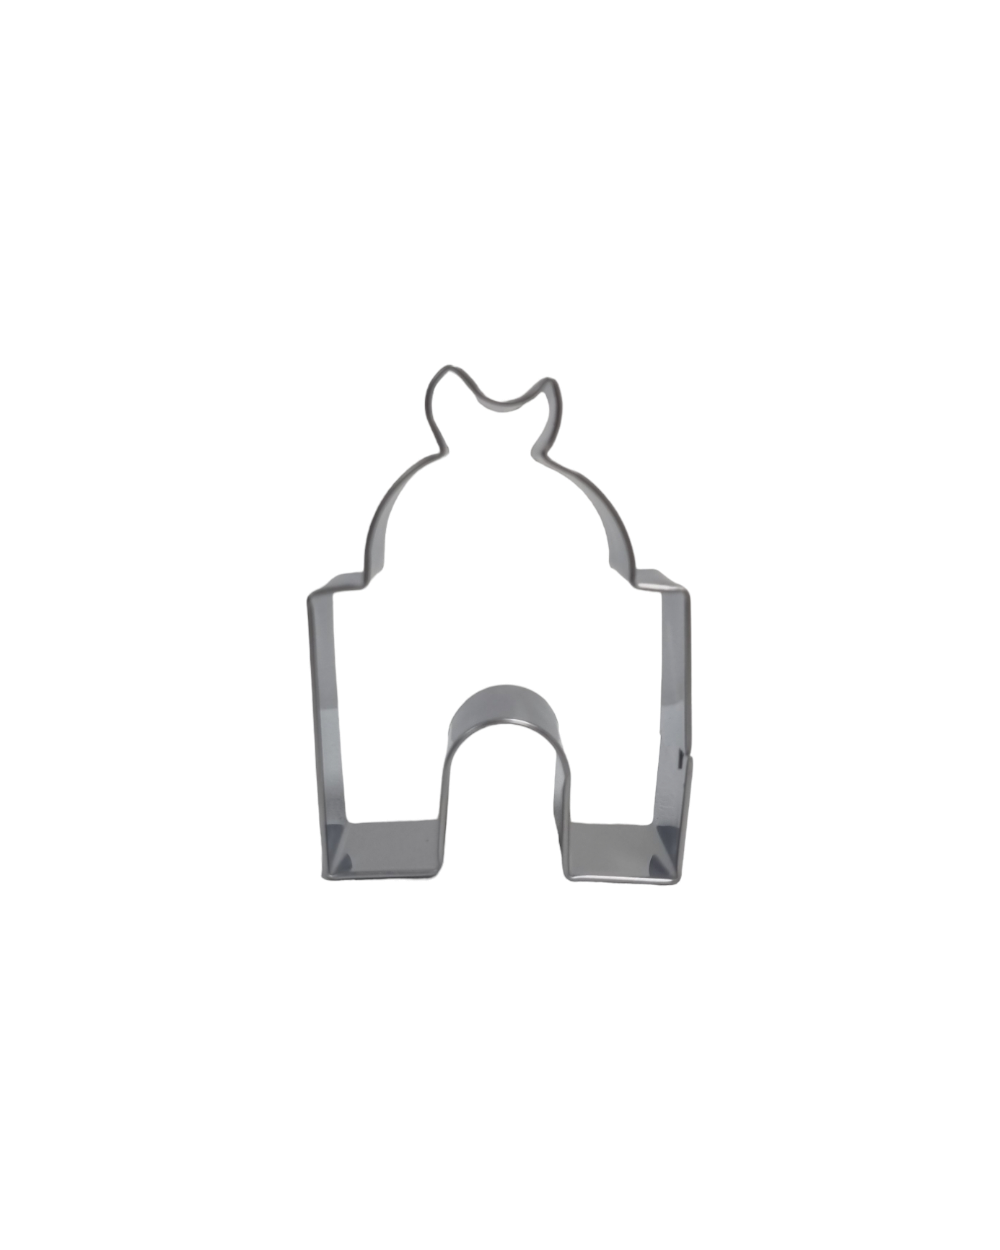 Cookie cutters for Eid el Adha in the shape of Sheep, Mosque and Moon